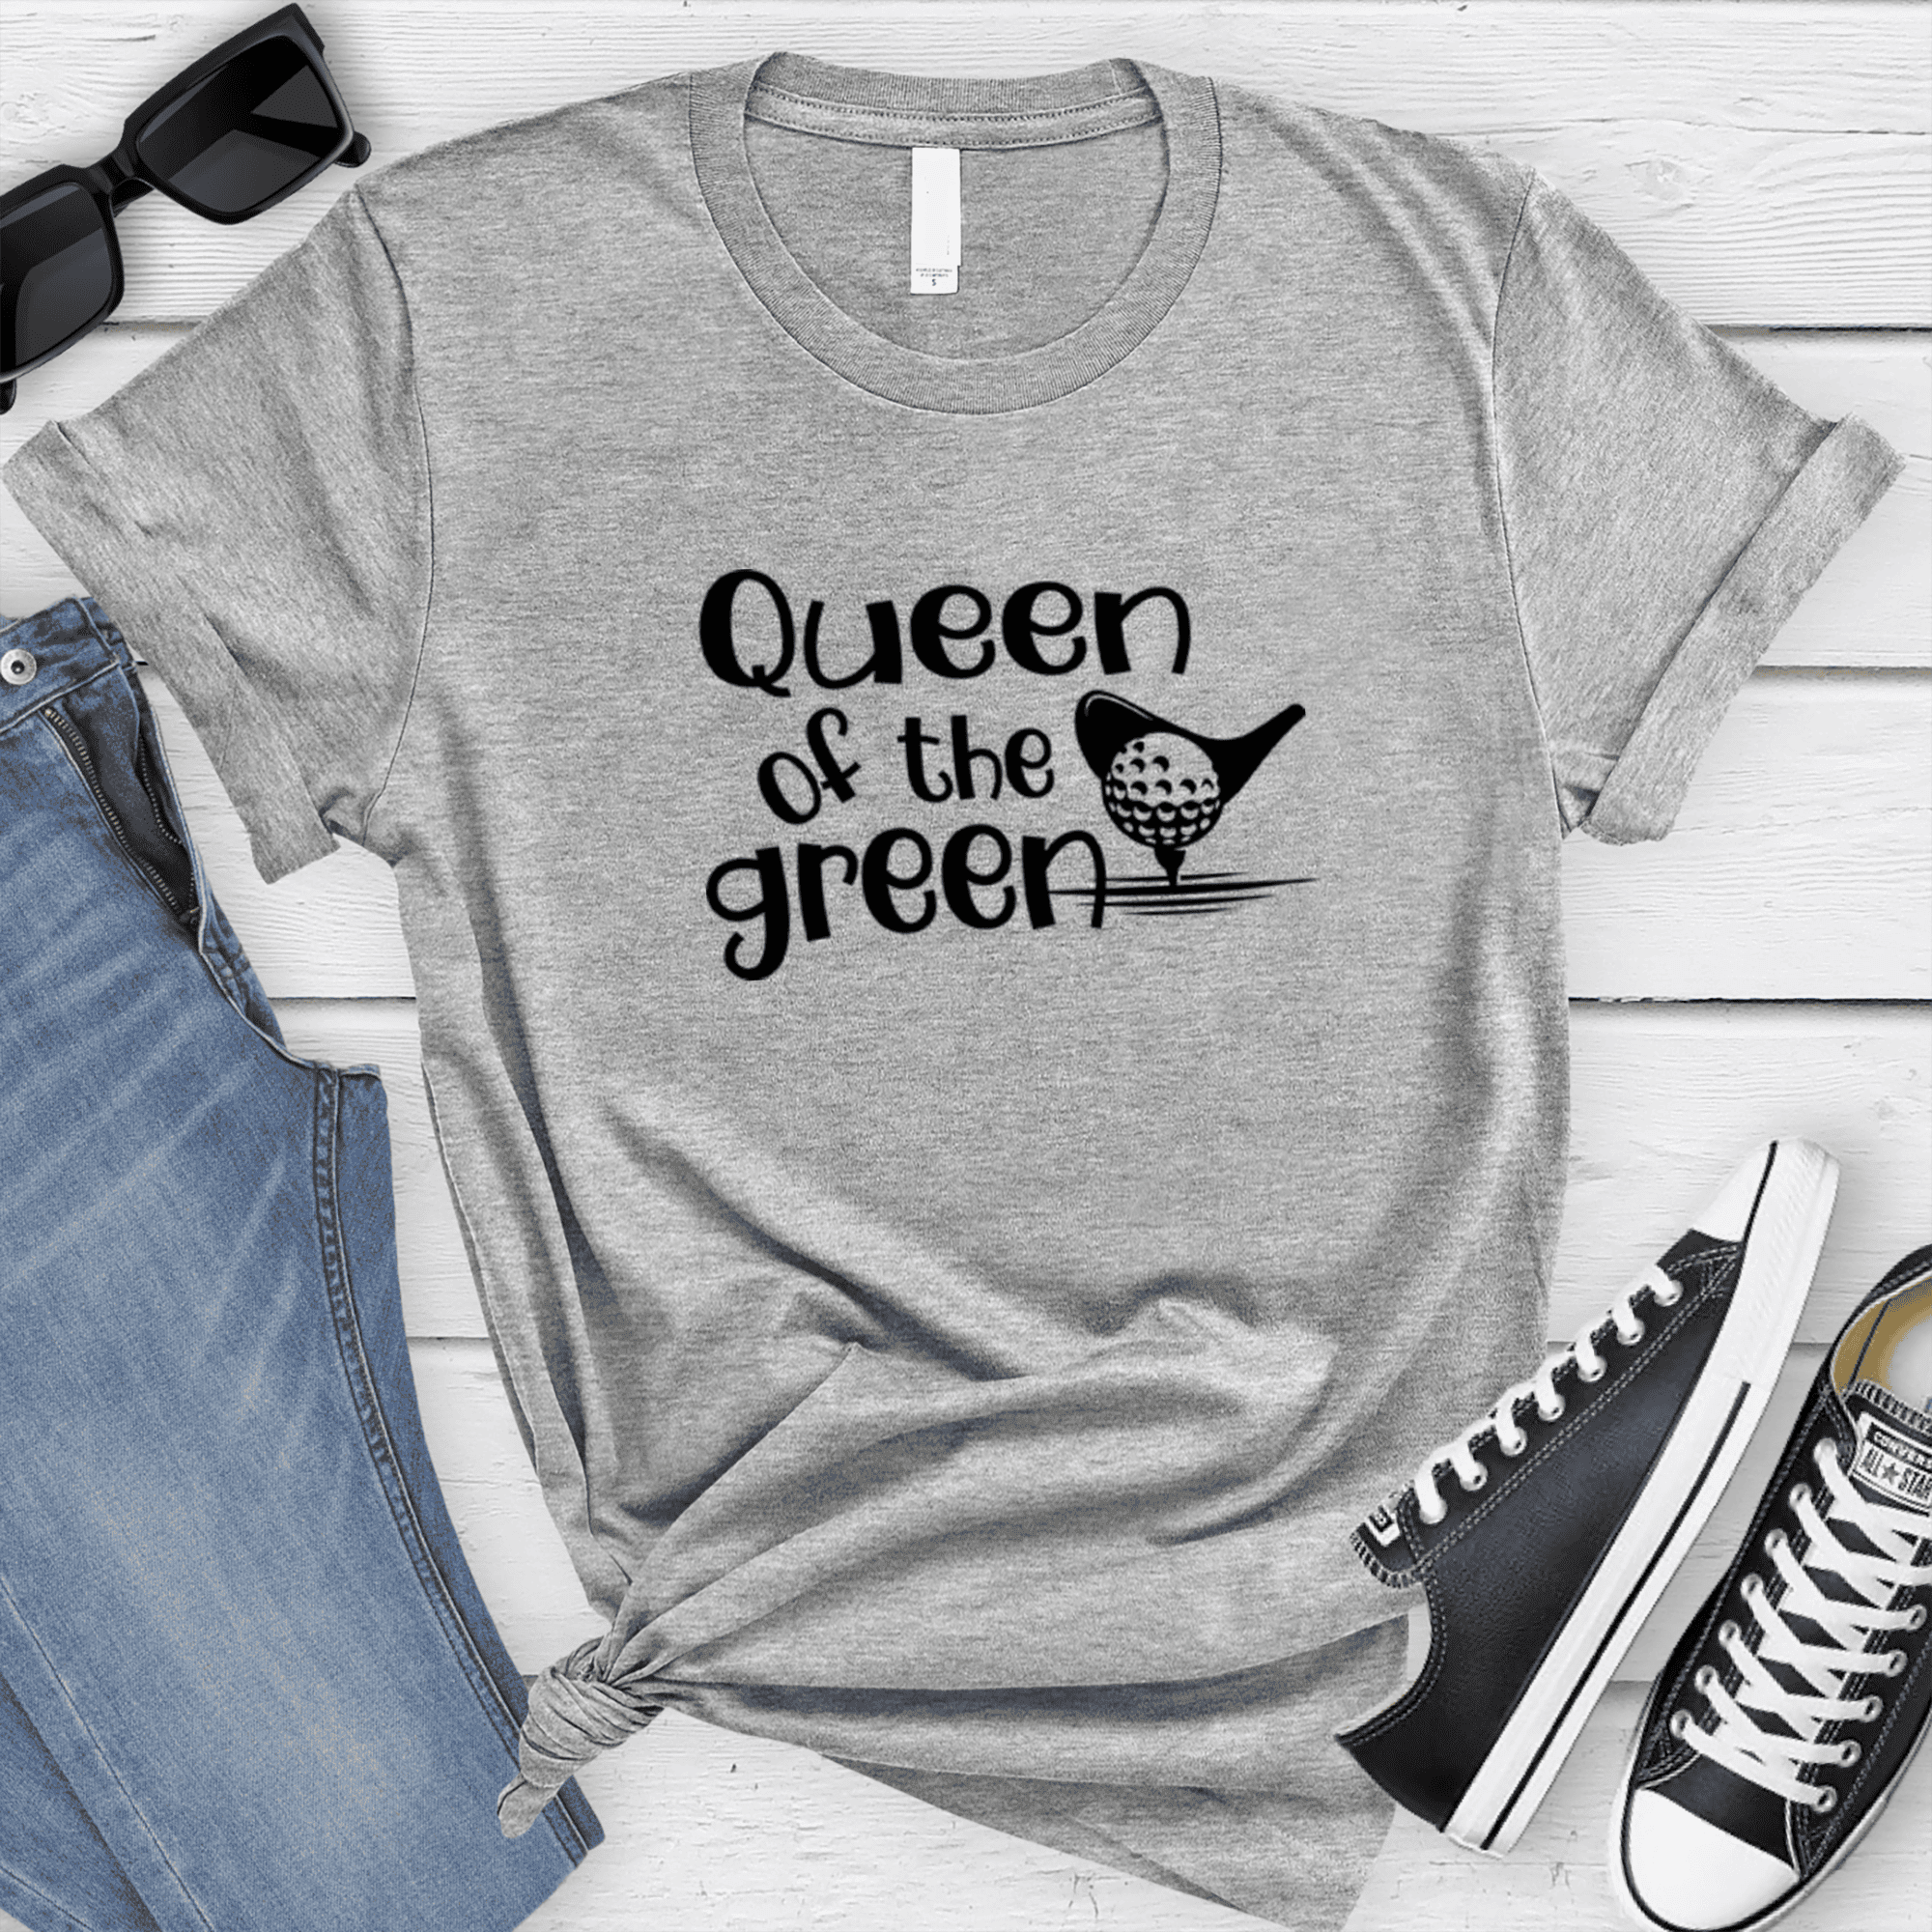 Womens Grey T Shirt with Queen-Of-The-Green design